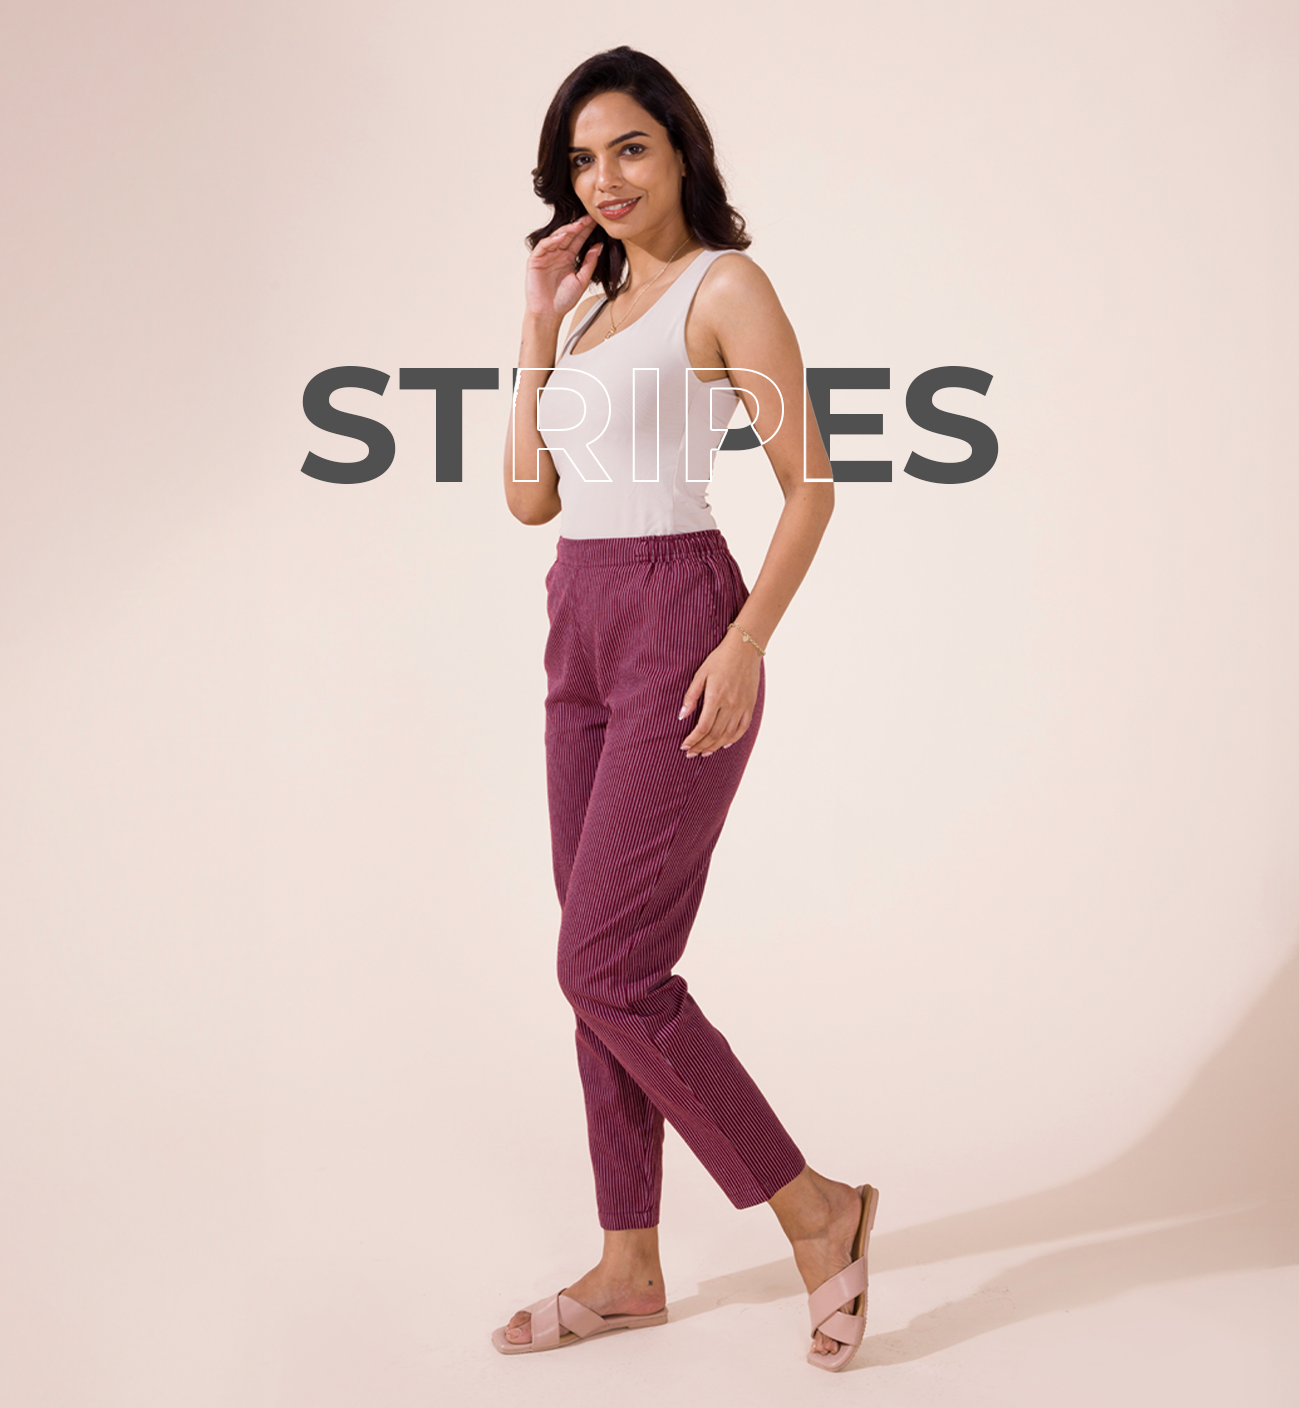 Buy Sexy Le ORE Leggings & Churidars - Women - 6 products